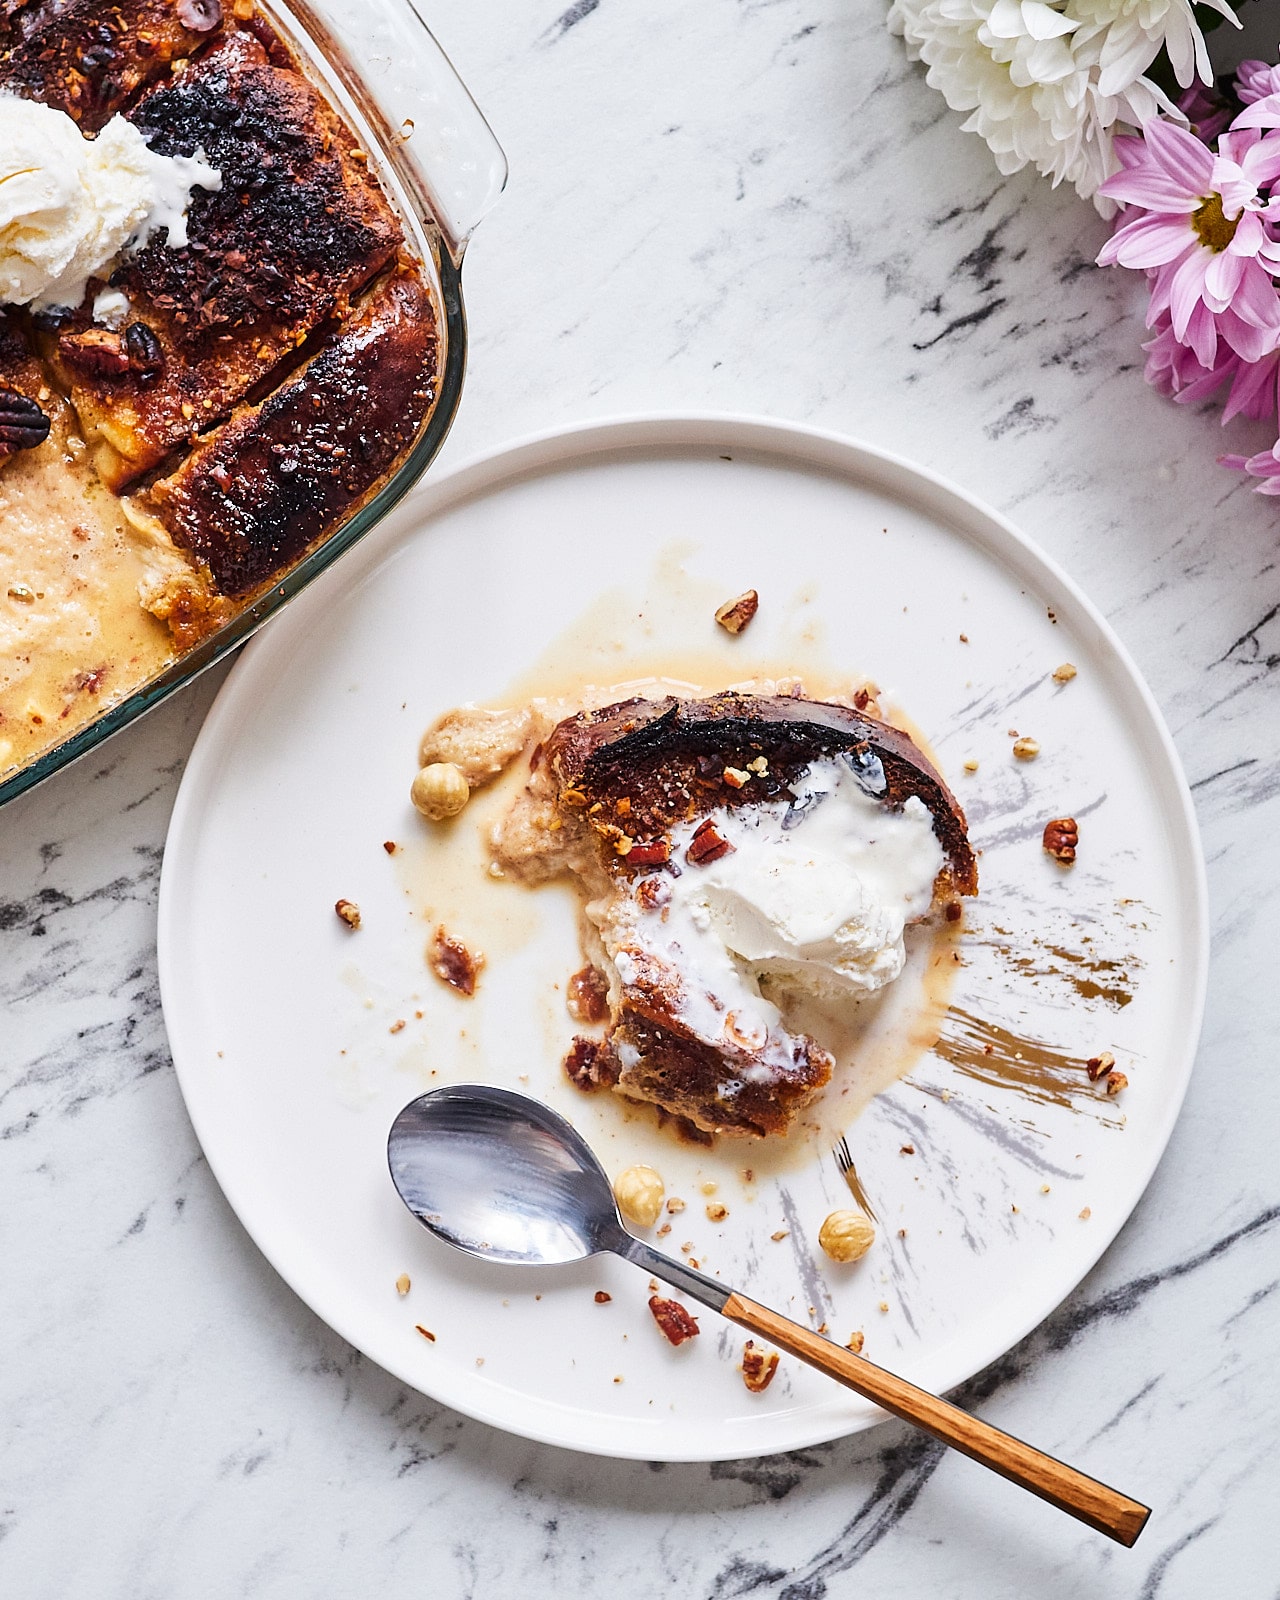 Serve the french toast warm, drizzled with delicious bourbon syrup, and topped with vanilla ice cream.